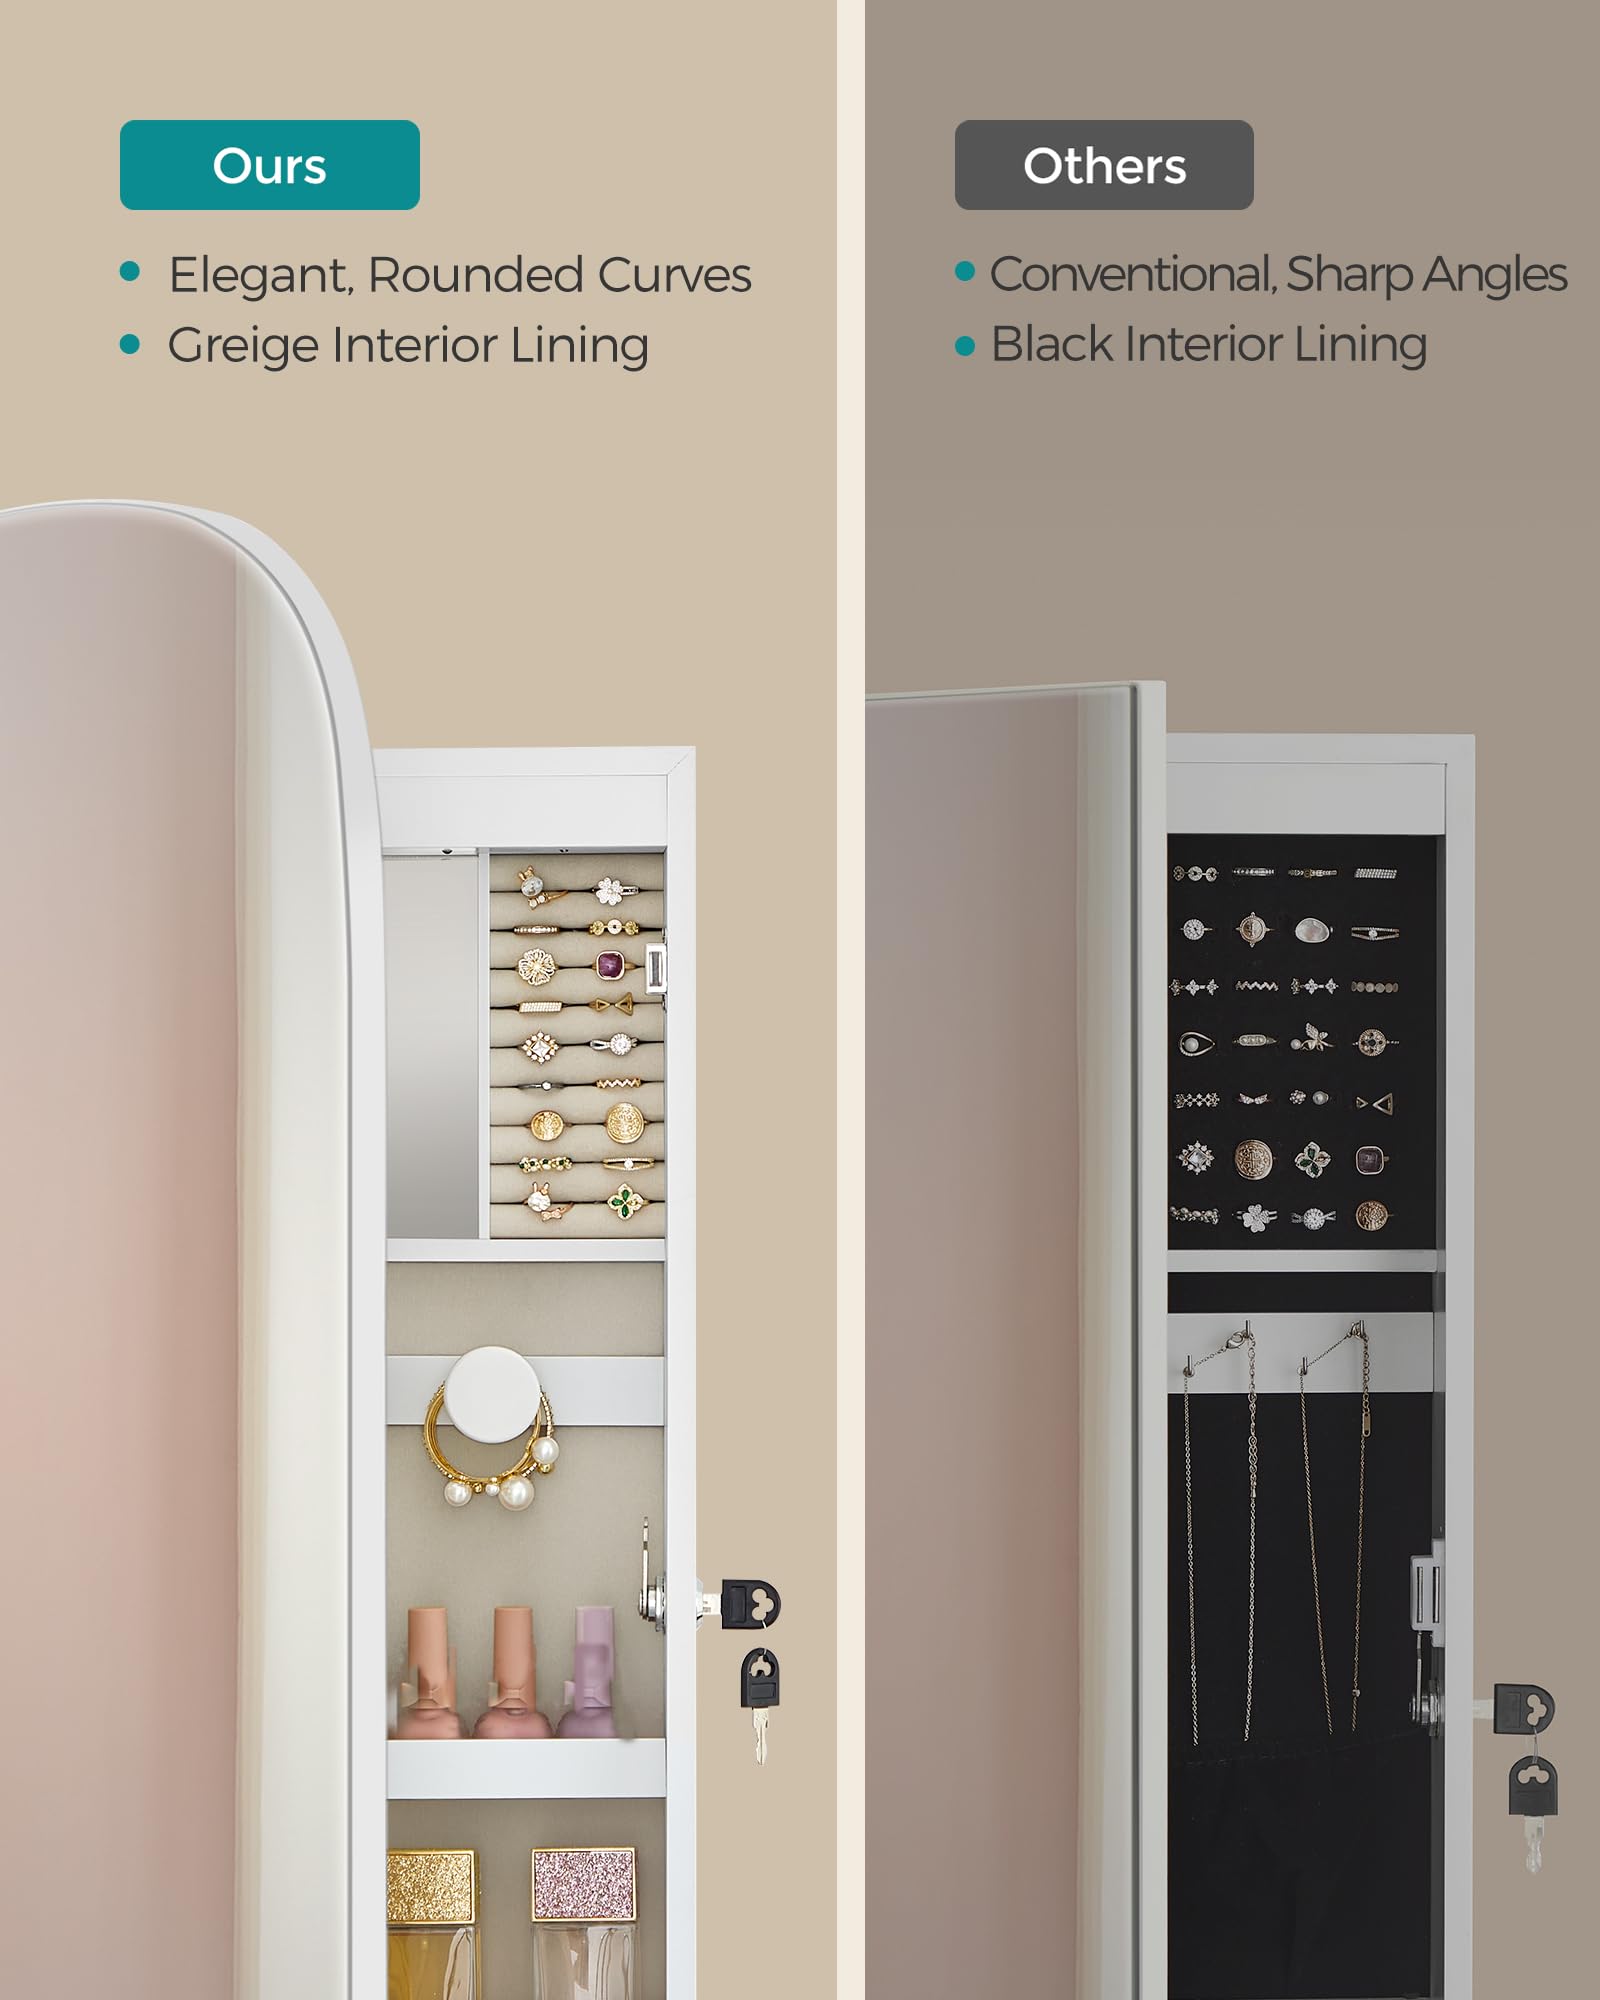 SONGMICS Jewelry Box and LED Jewelry Cabinet Bundle, Jewelry Organizer, Rounded Wide Mirror with Storage, Cloud White and Gold Color, White Surface with Greige Lining UJBC239WT and UJJC026W01